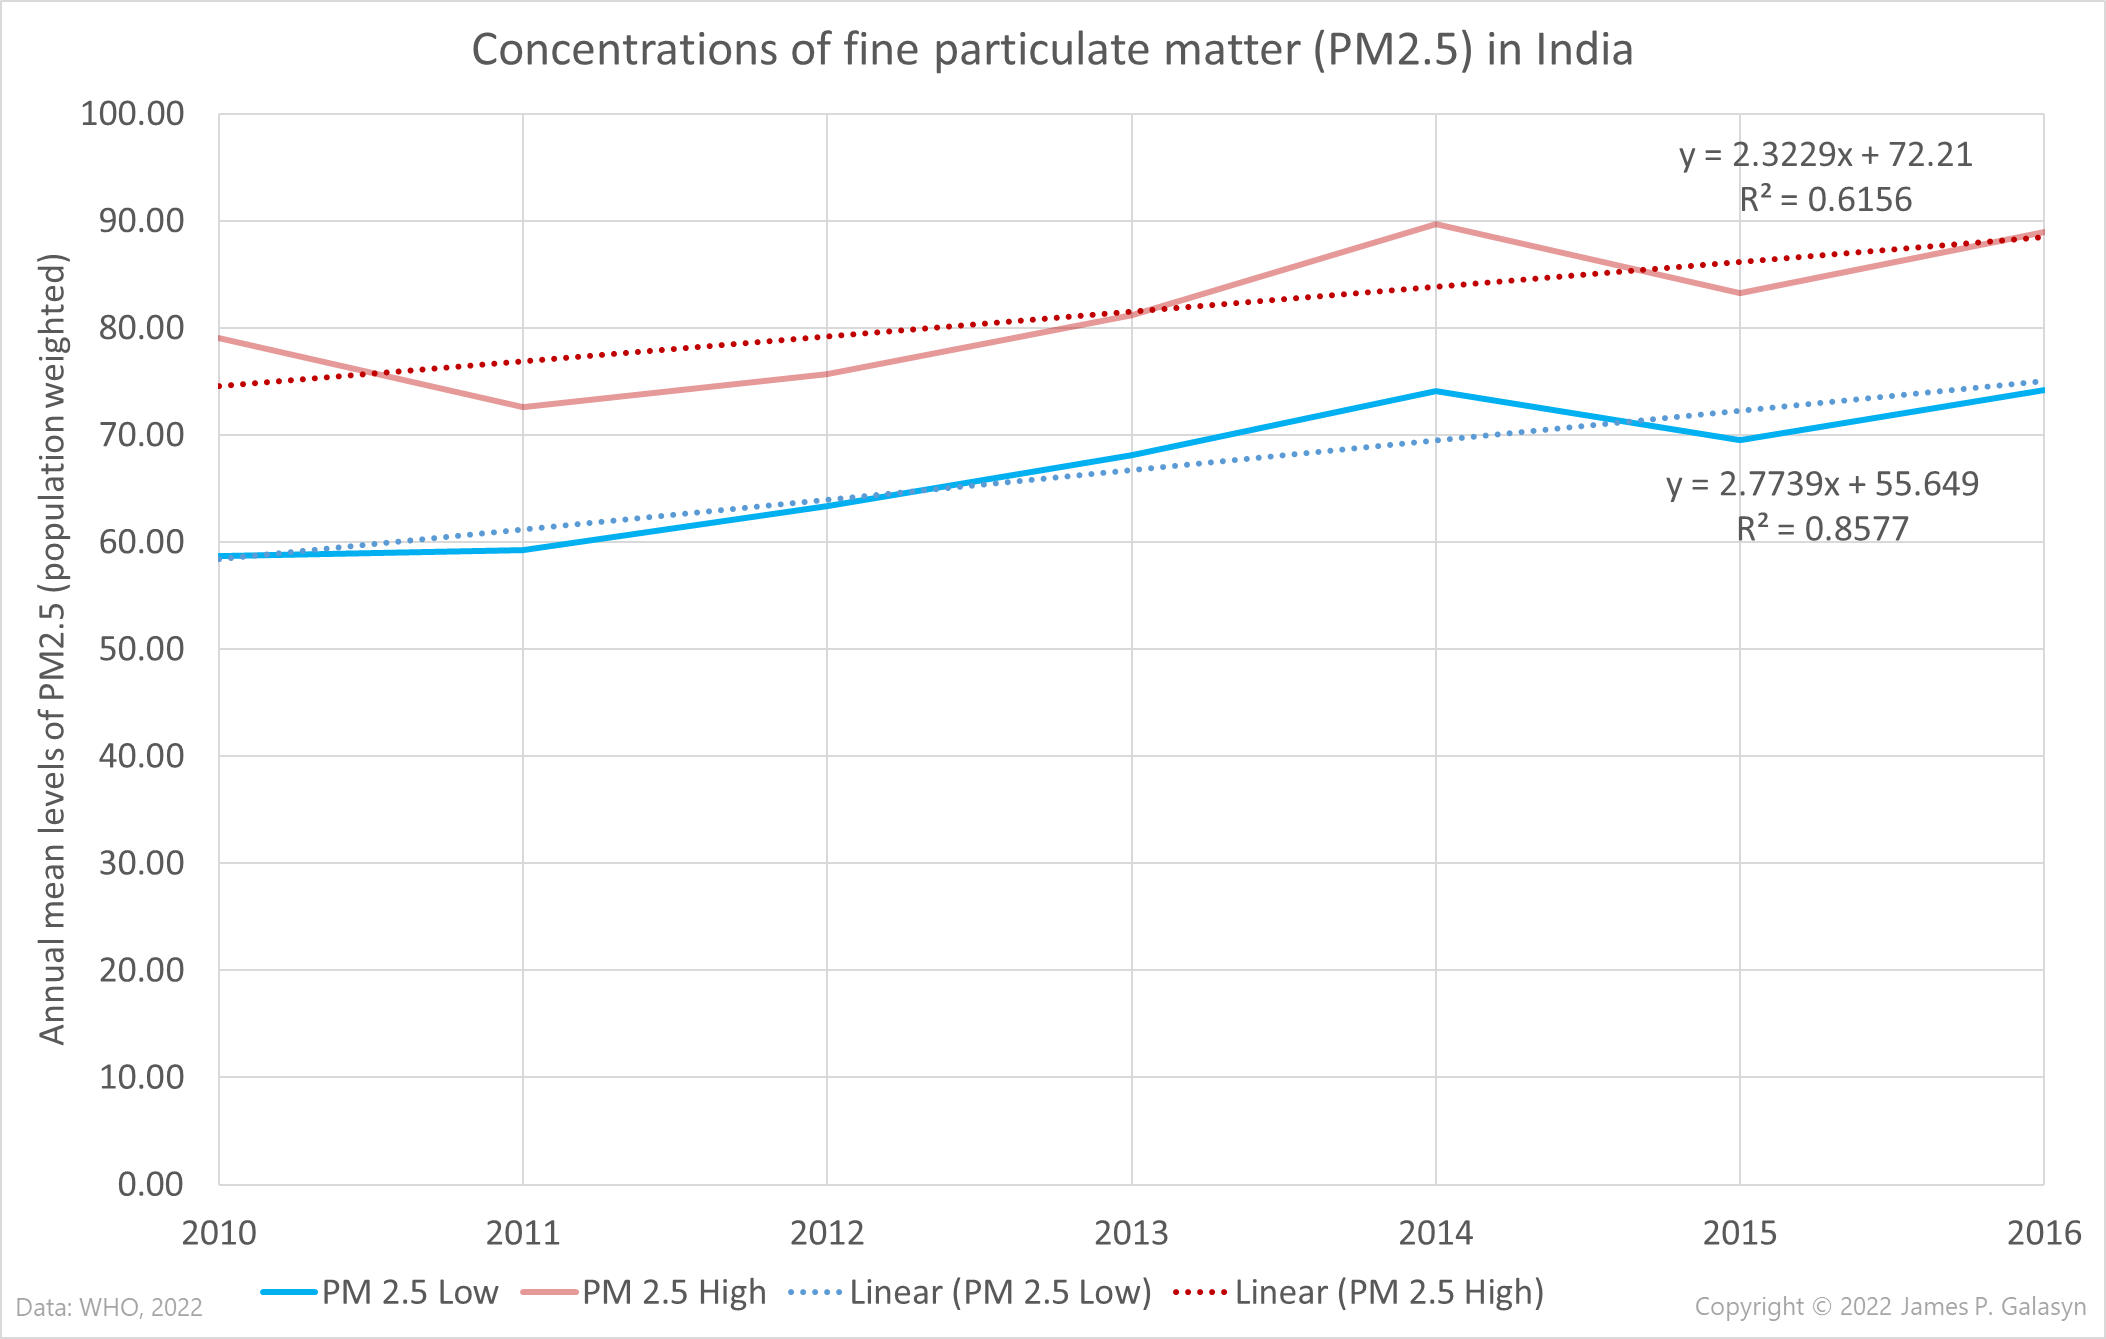 Concentrations of fine particulate matter (PM2.5) in India, 2010-2016 Data: WHO. Graphic: James P. Galasyn